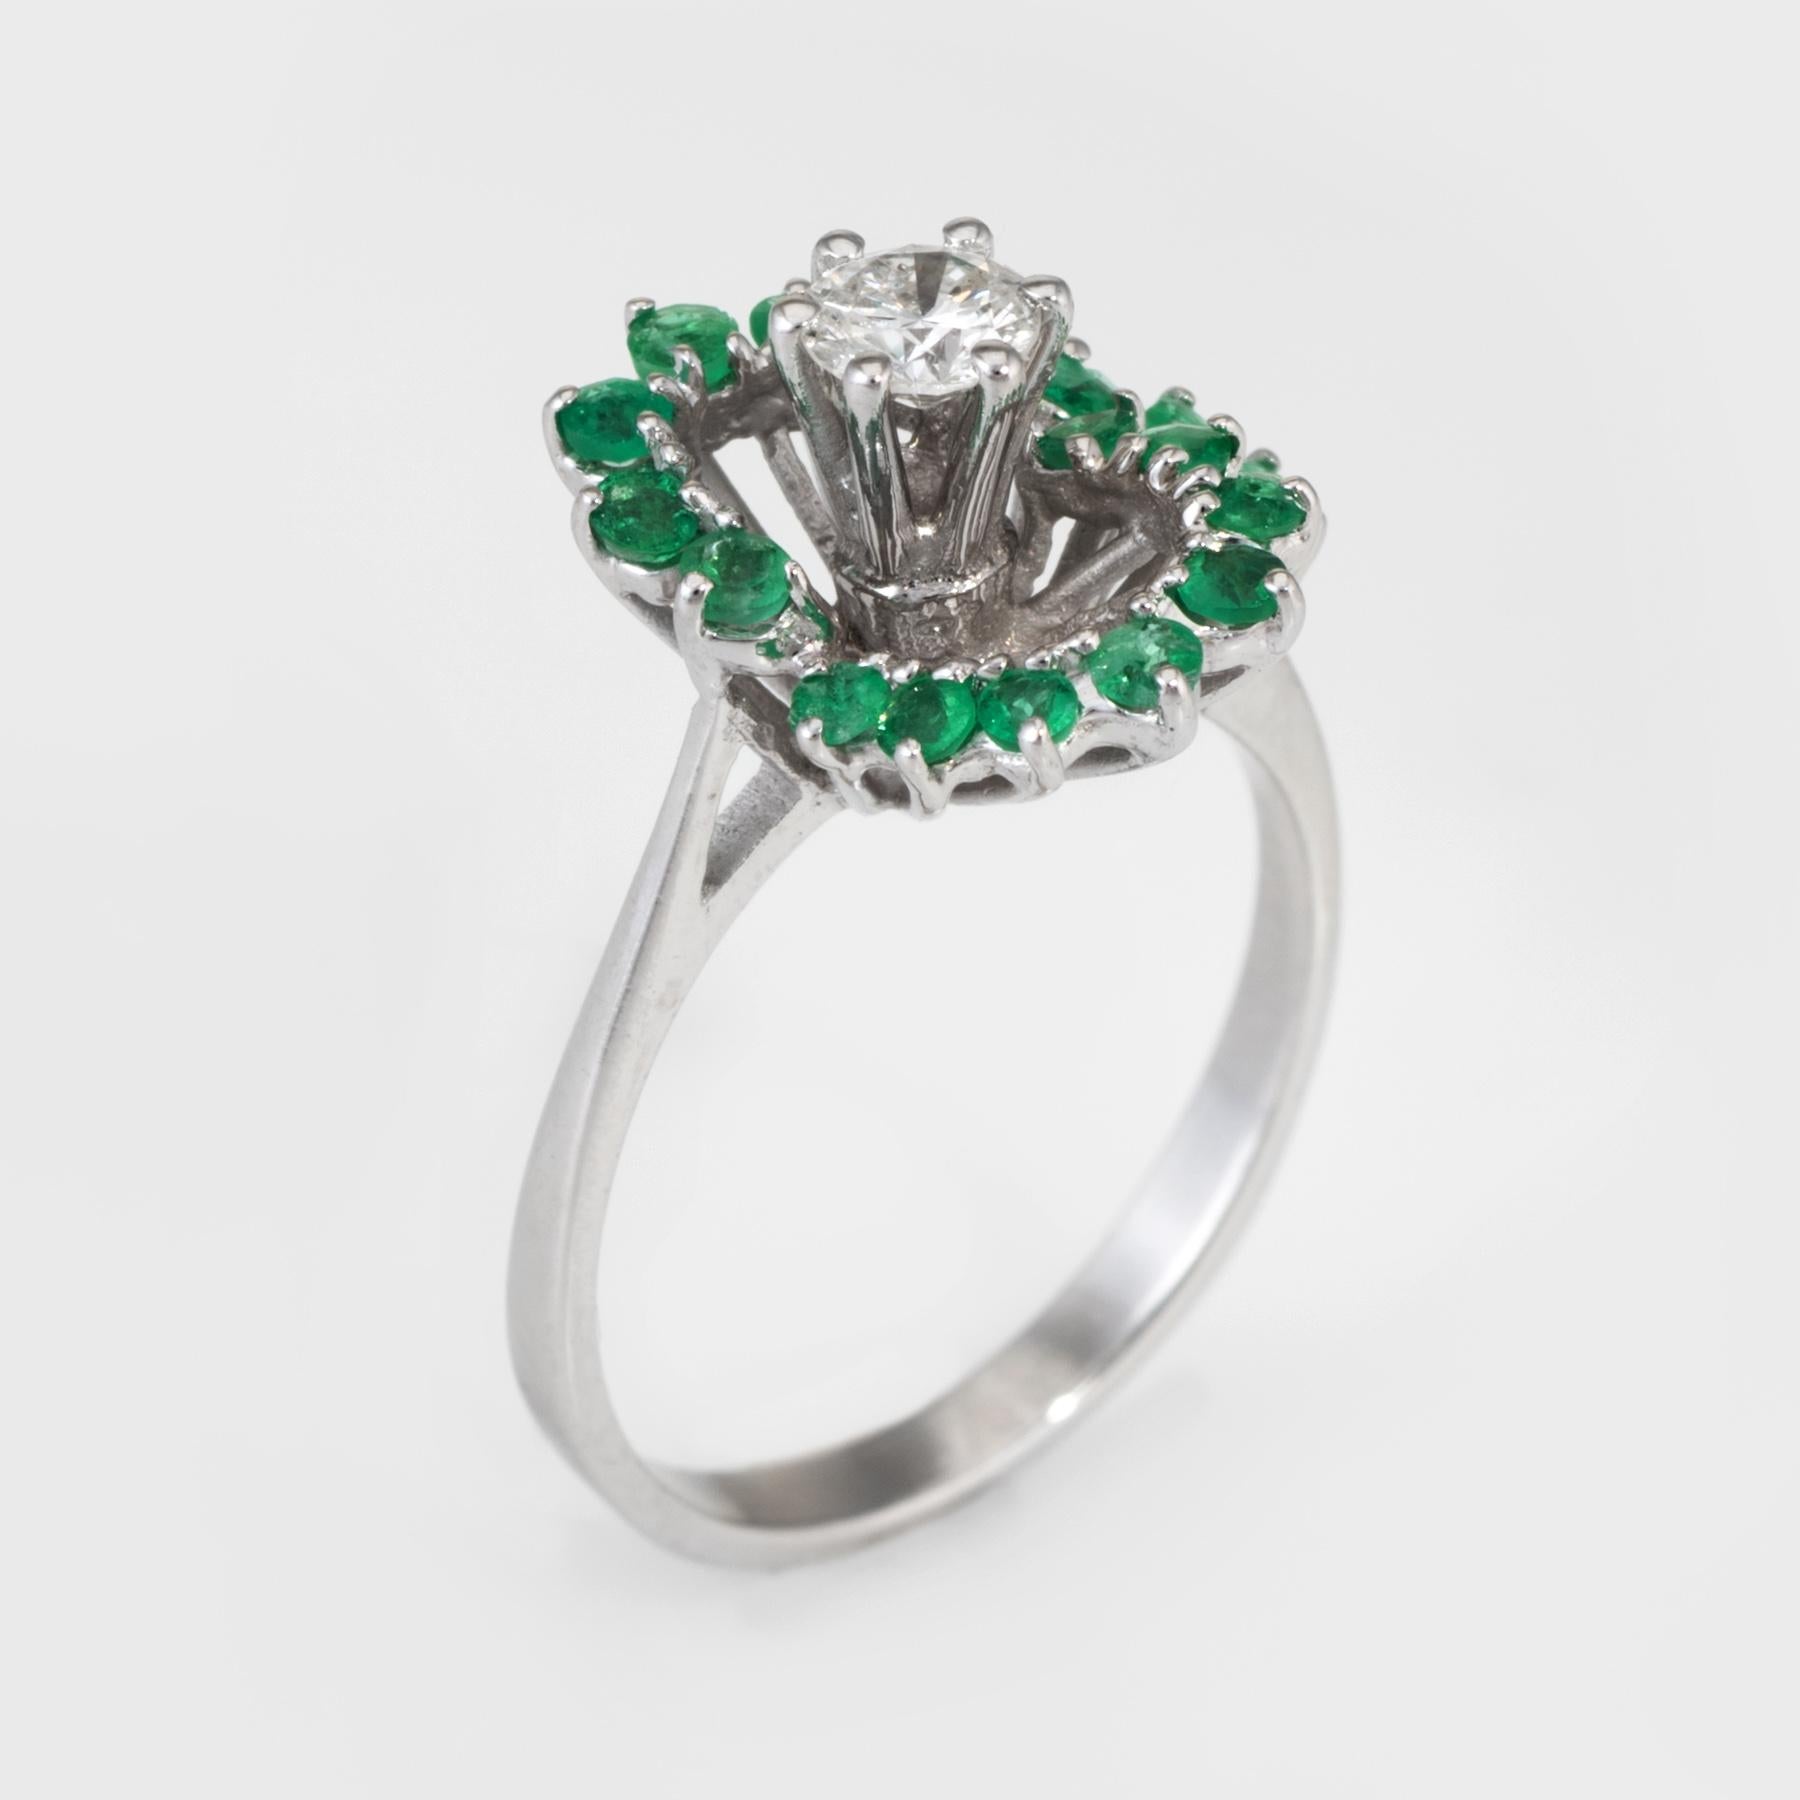 Finely detailed vintage cocktail ring, crafted in 14 karat white gold. 

Centrally mounted estimated 0.25 carat round brilliant cut diamond (estimated at H-I color and SI2 clarity), is accented with an estimated 0.34 carats of emeralds.     

The